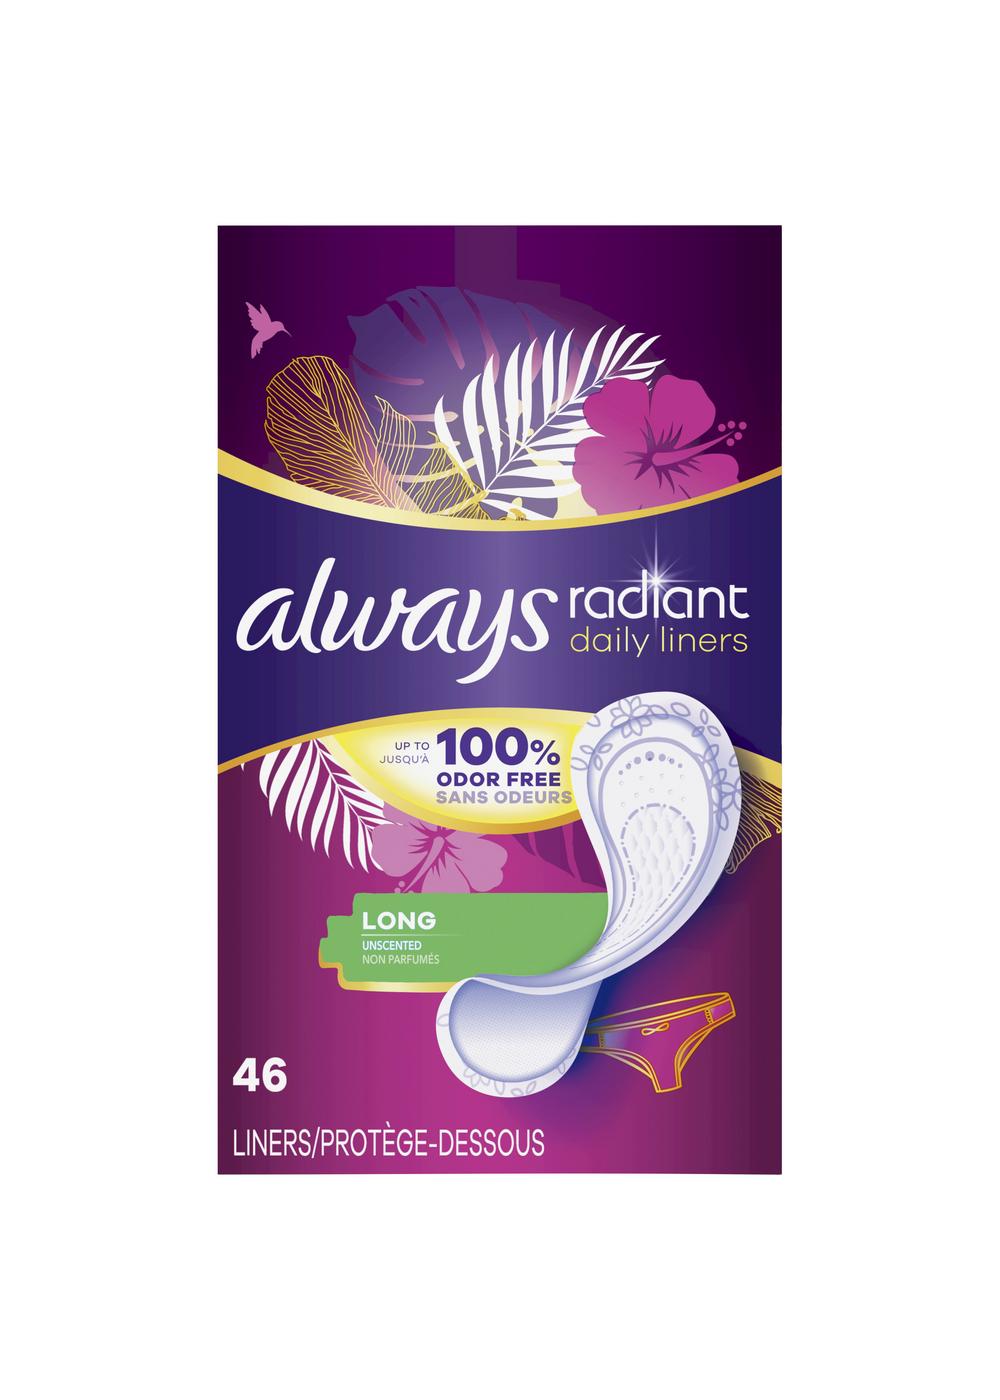 Always Radiant Daily Liners - Long; image 1 of 10